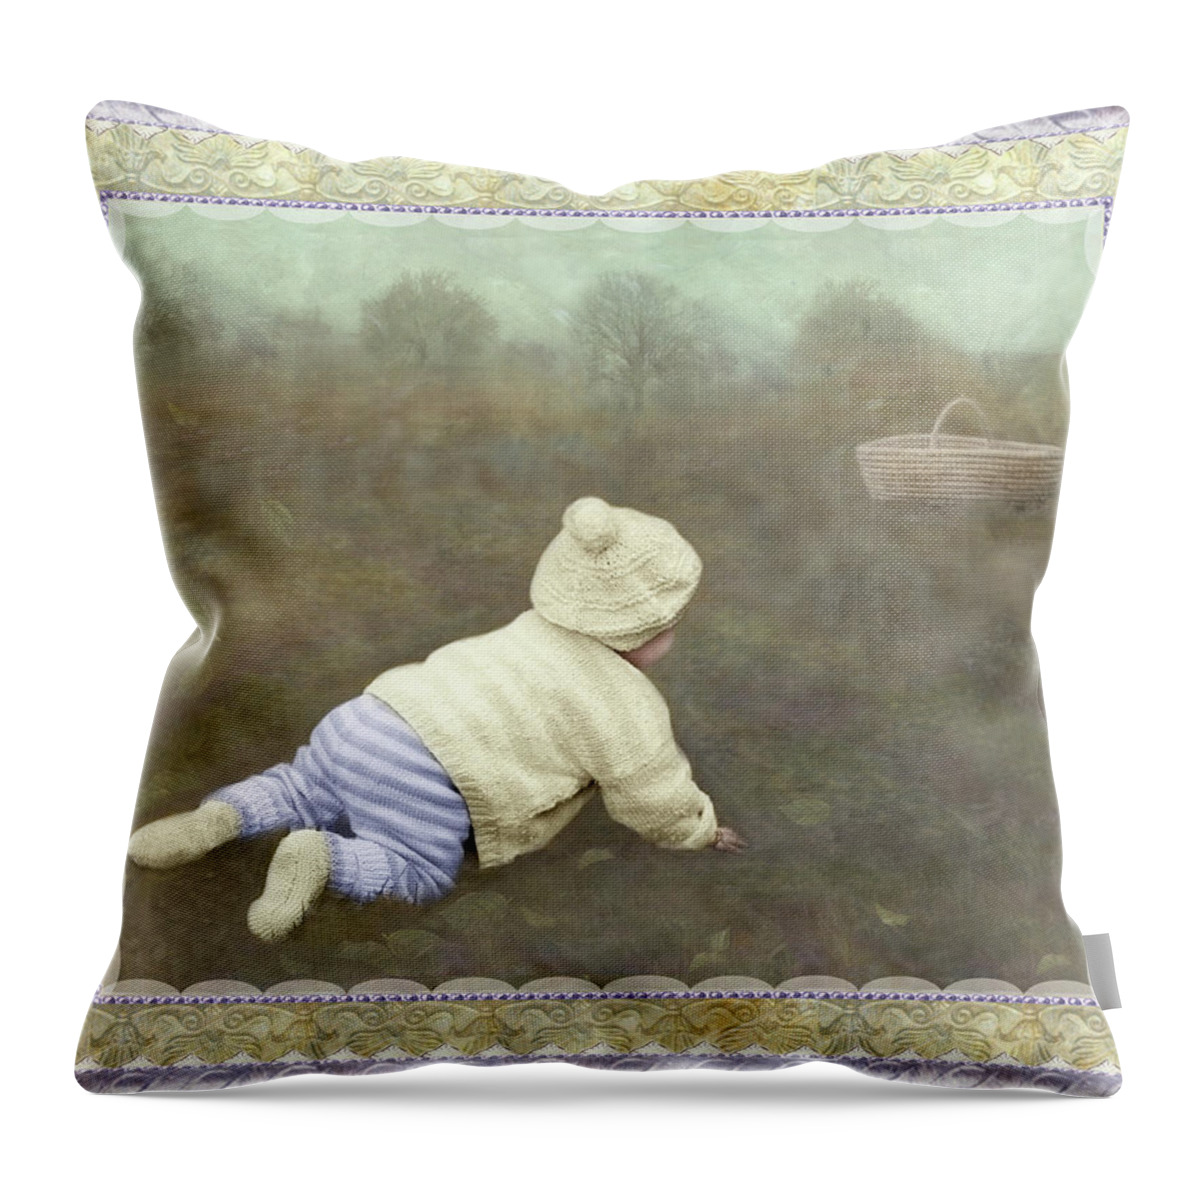  Throw Pillow featuring the photograph Is Bunny In The Basket? by Adele Aron Greenspun